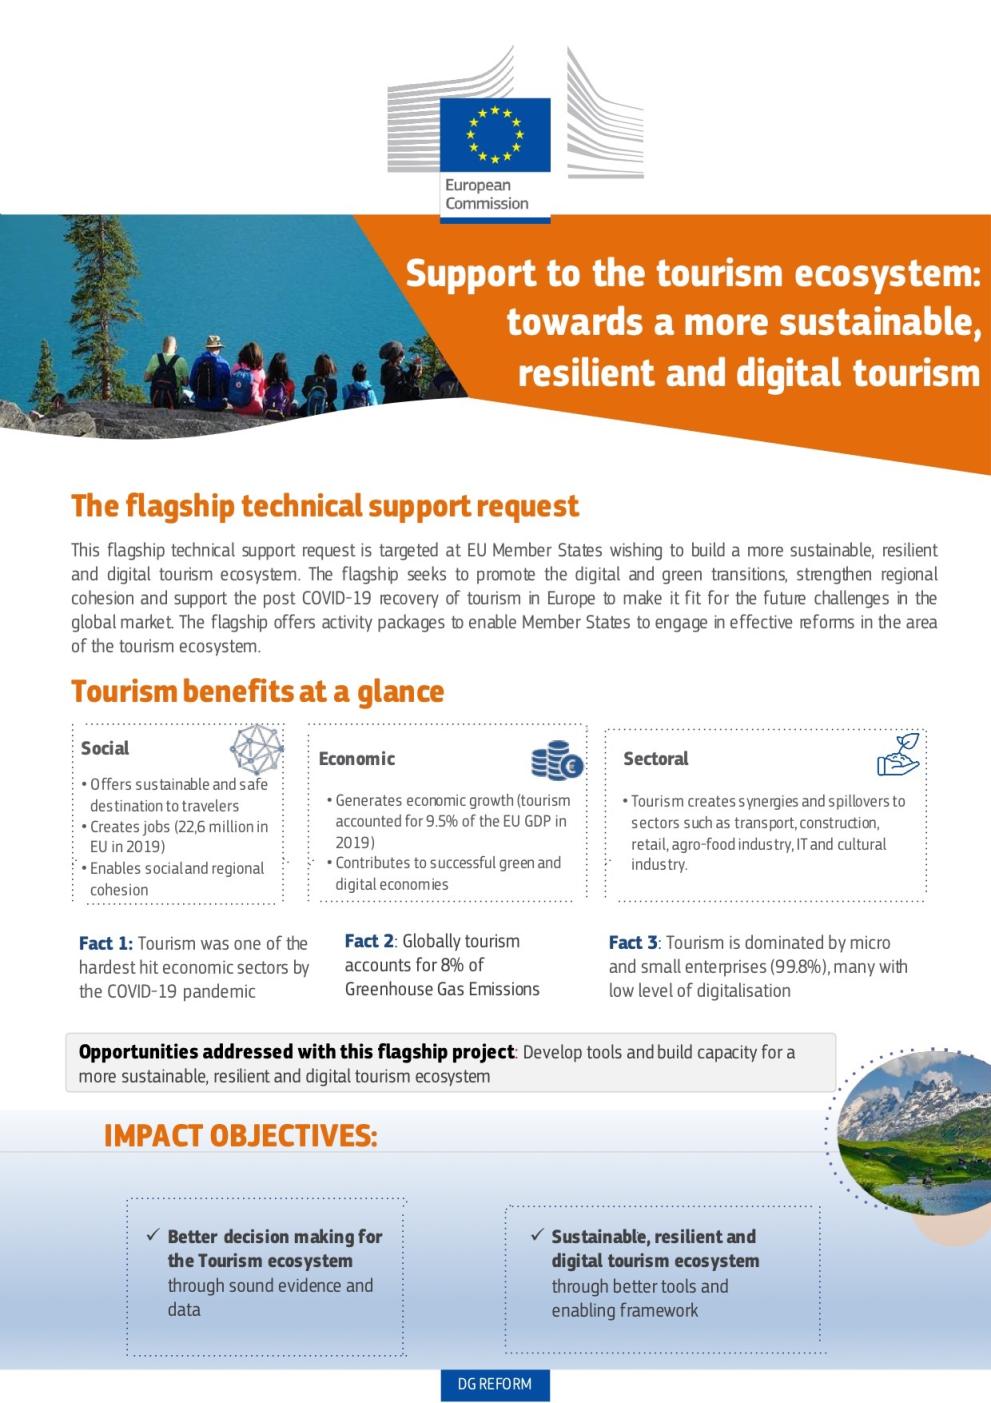 Support to the Tourism ecosystem: towards a more sustainable, resilient and digital tourism